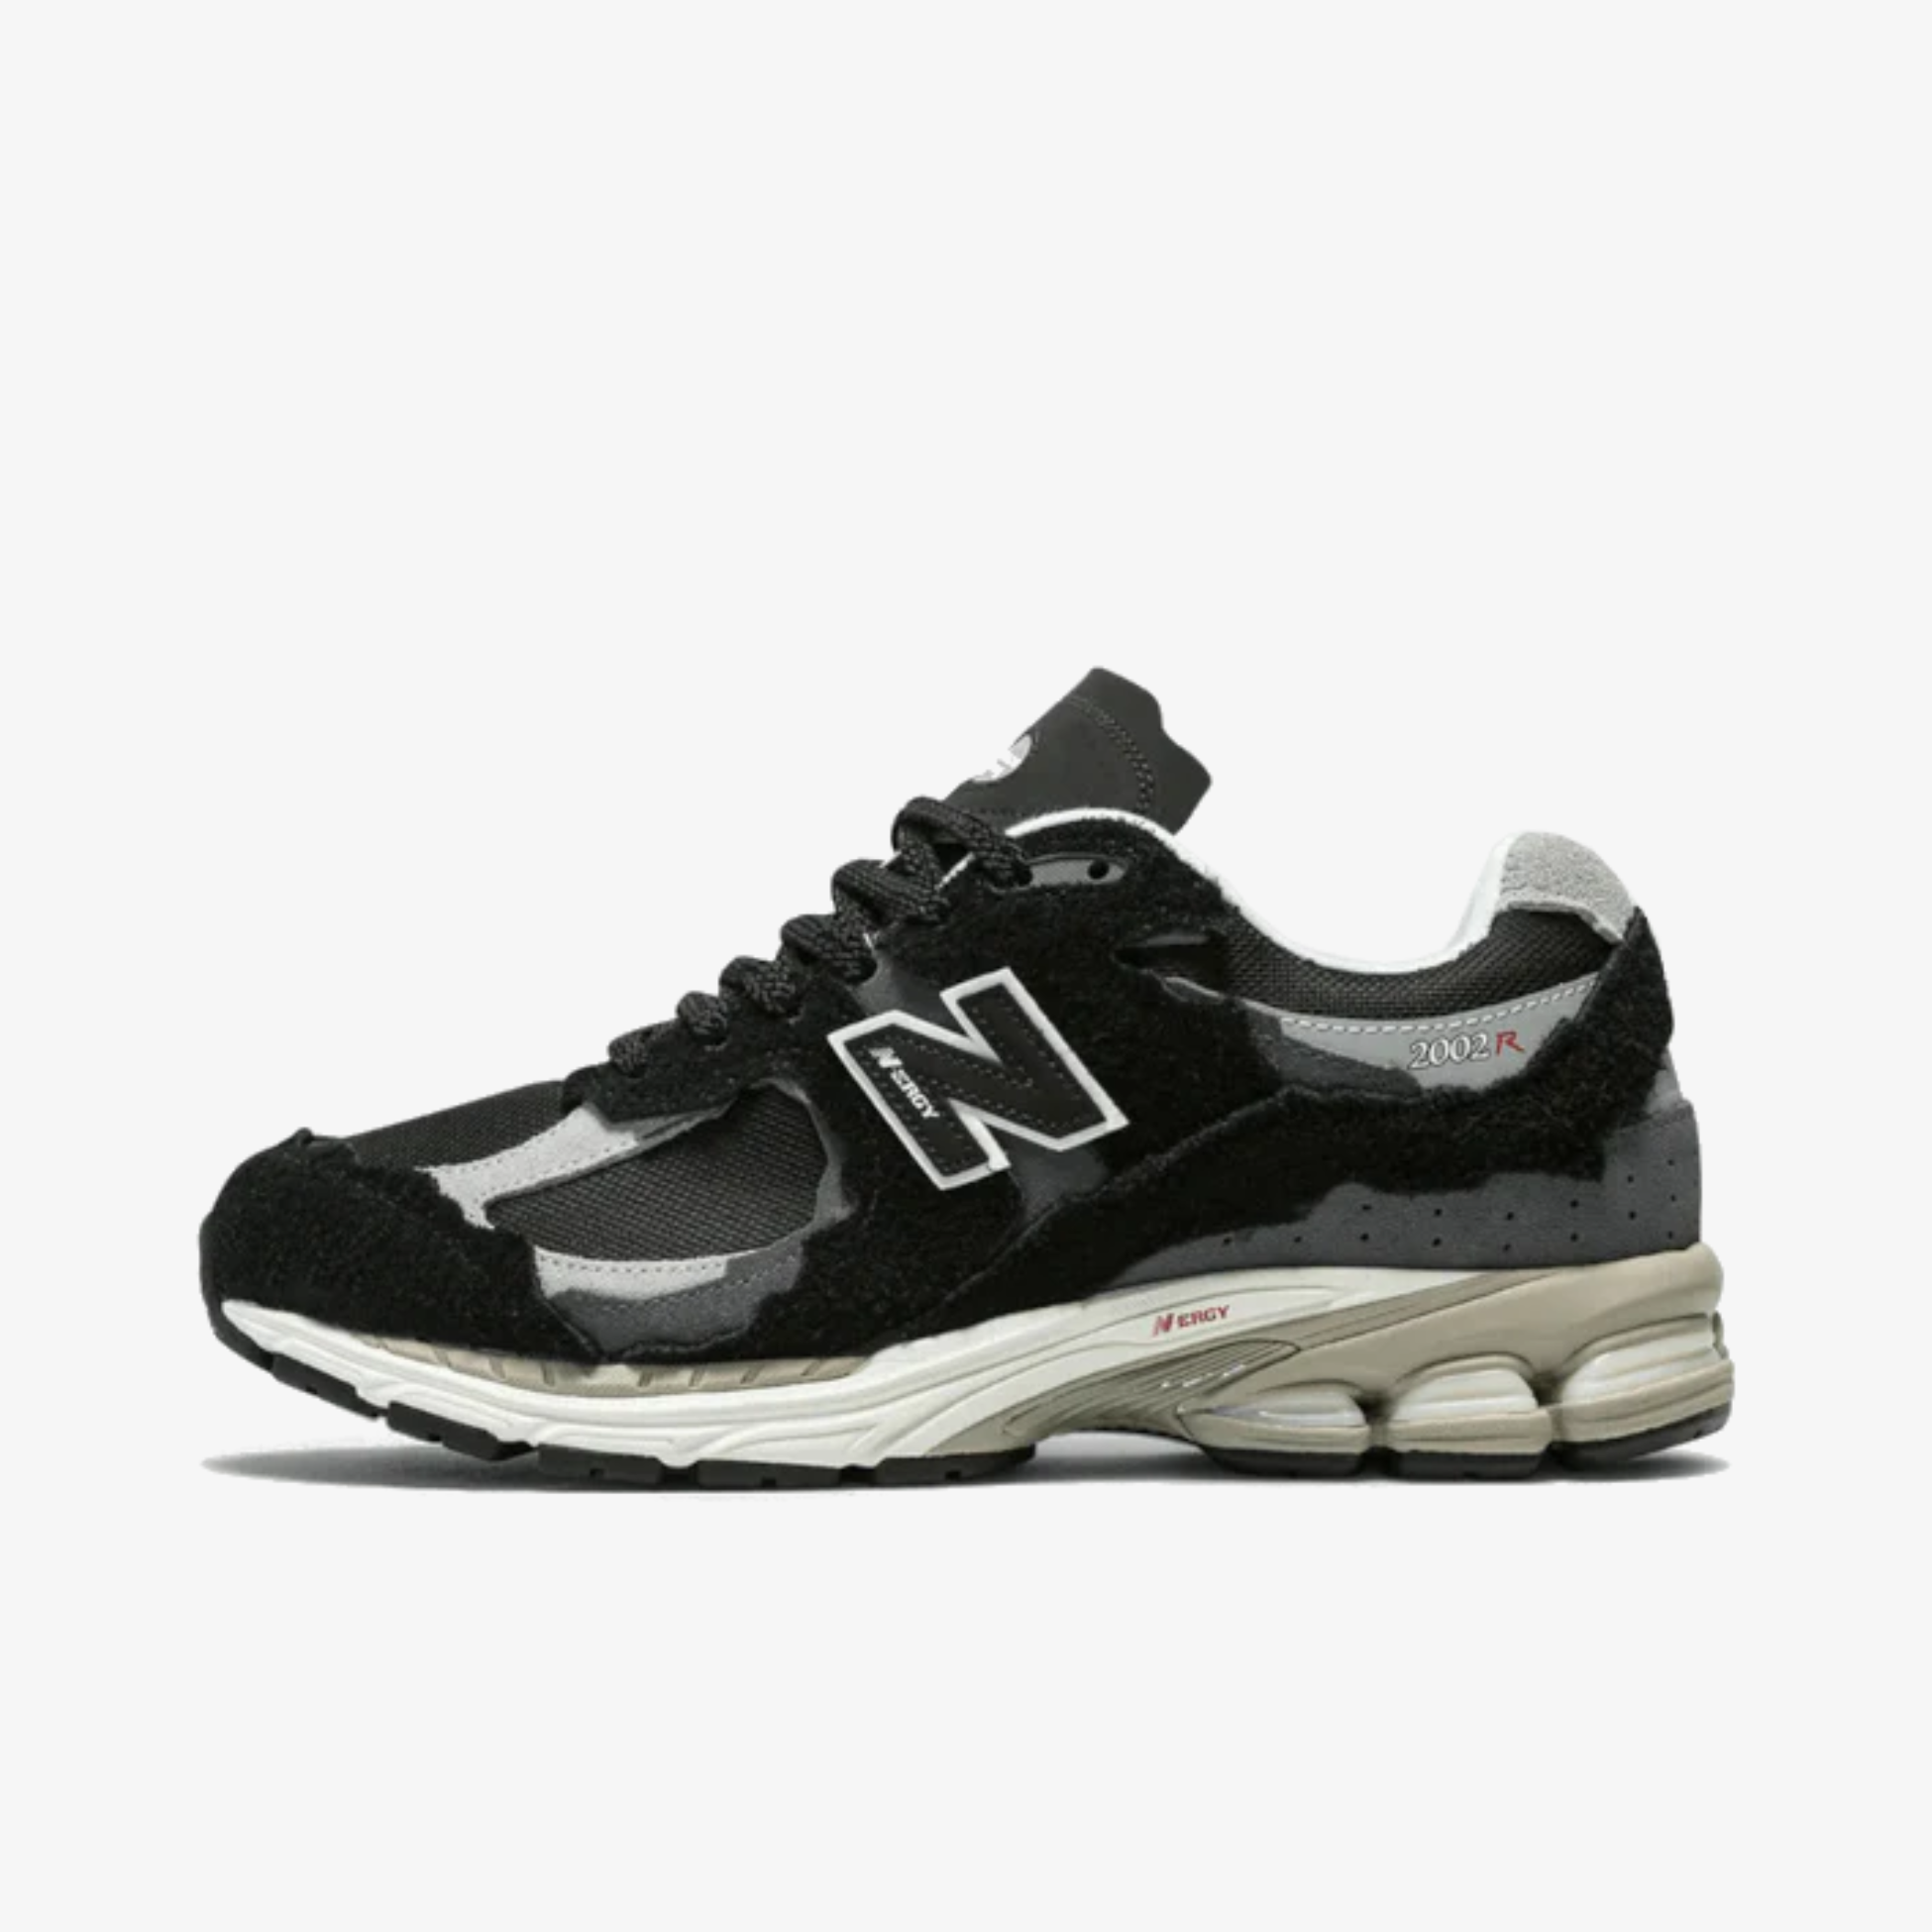 New Balance 2002R Protection Pack Negro